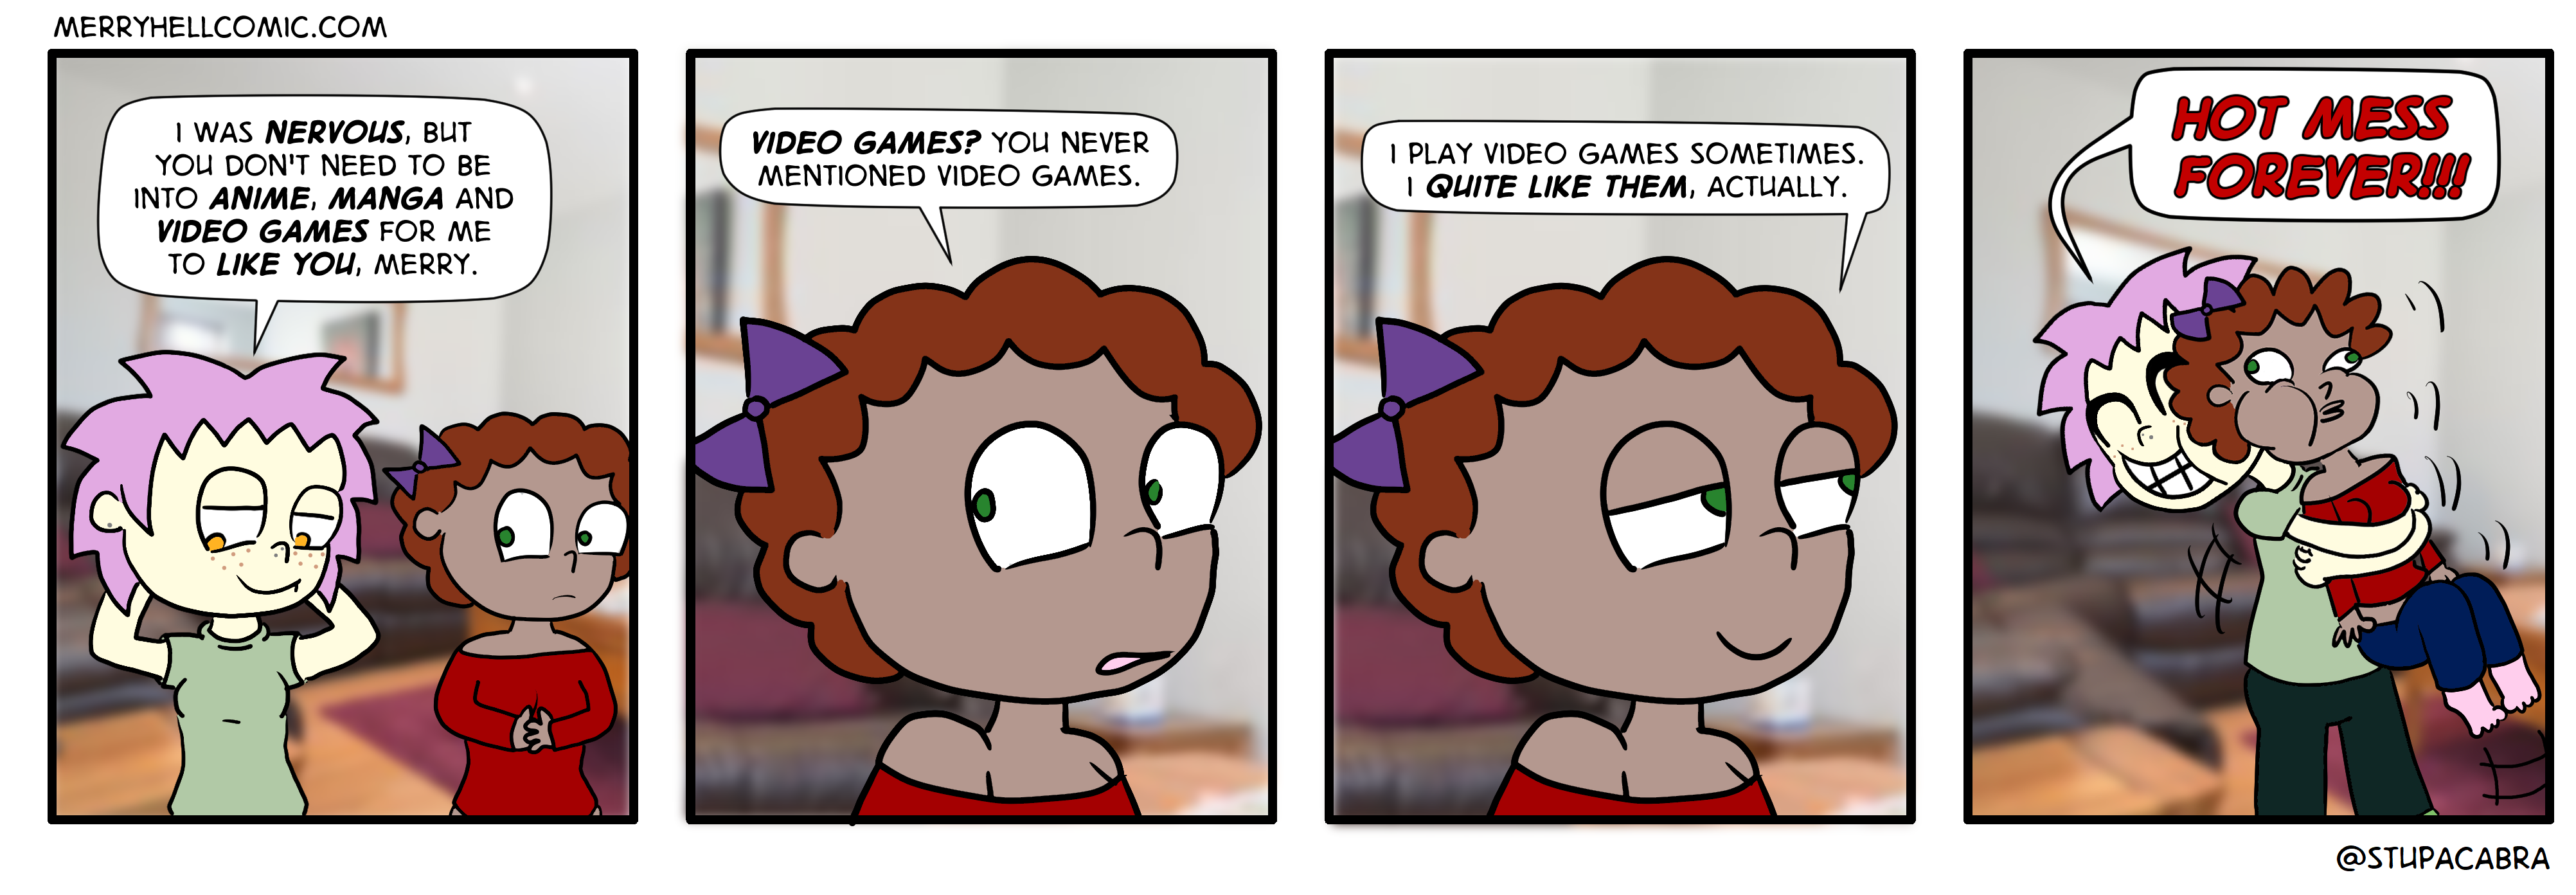 425. Video games